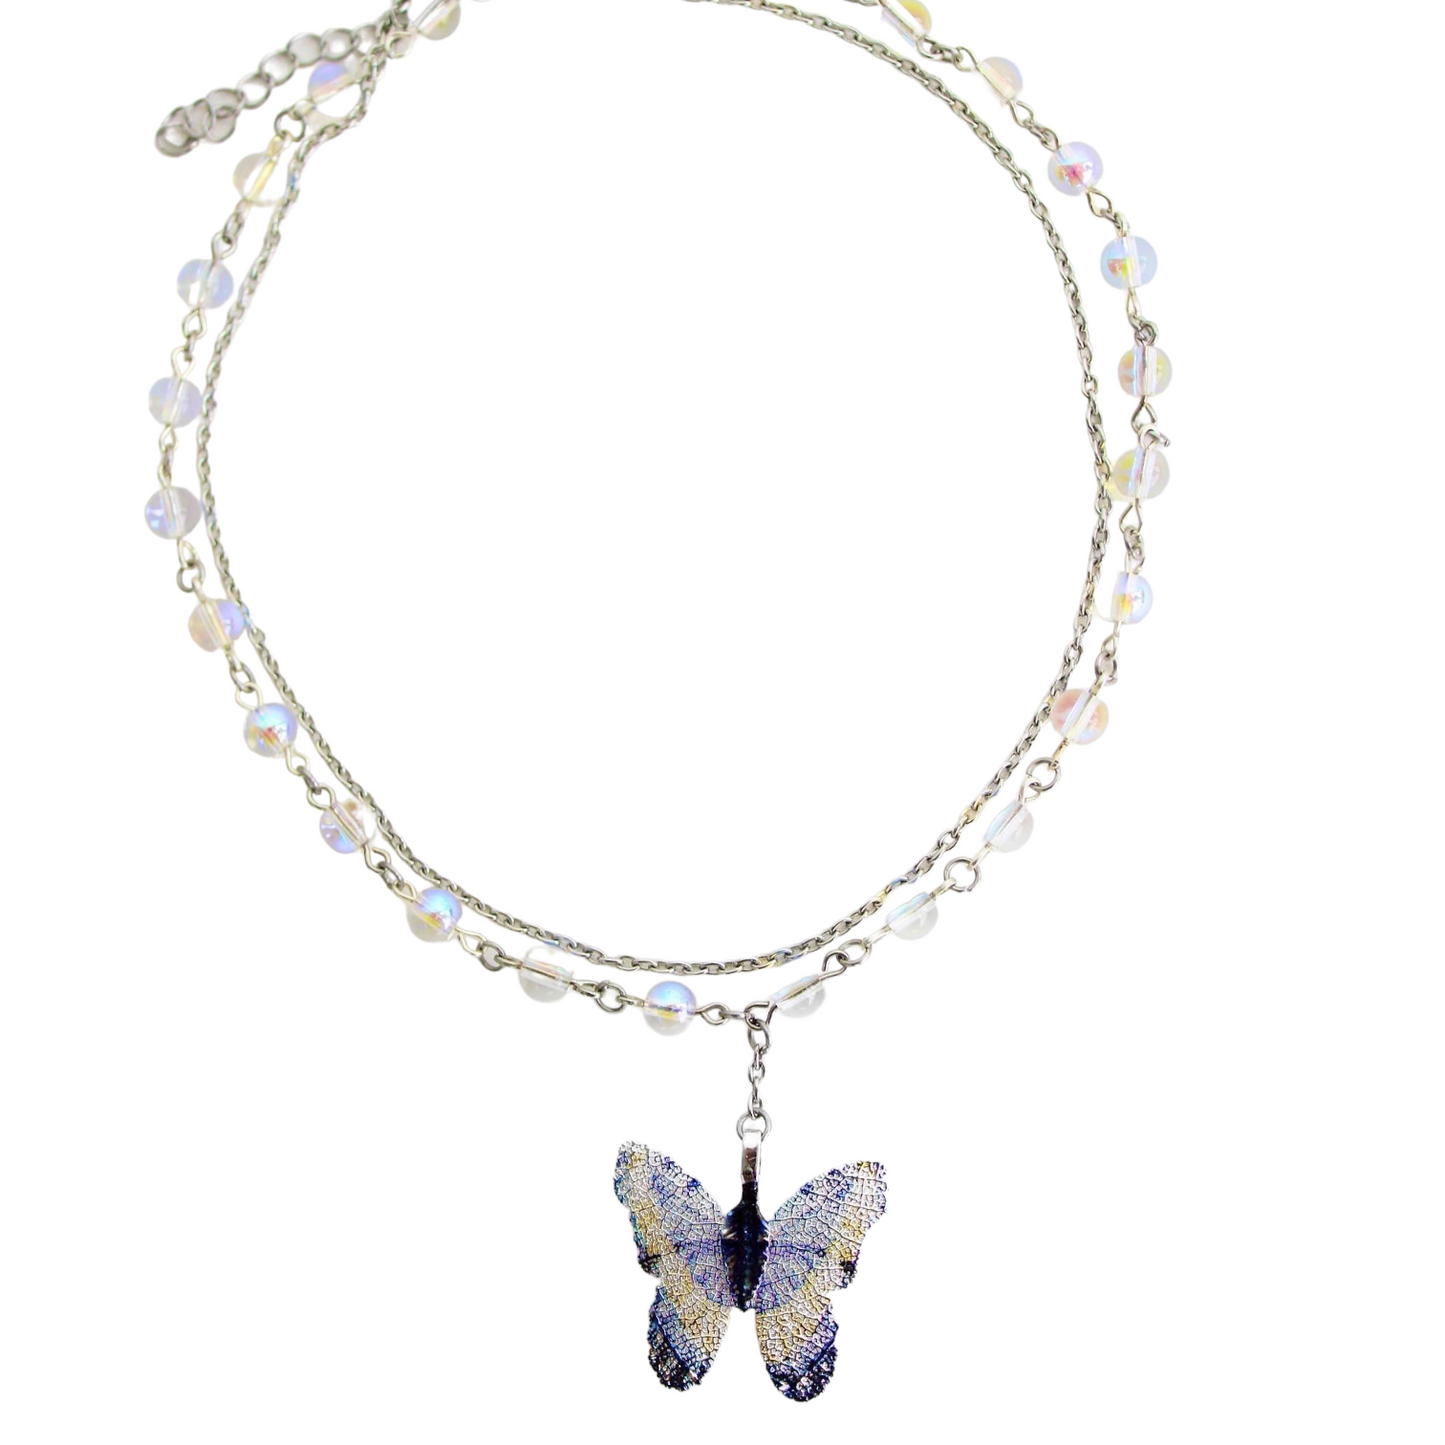 Blue Butterfly Necklace with Iridescent Beads